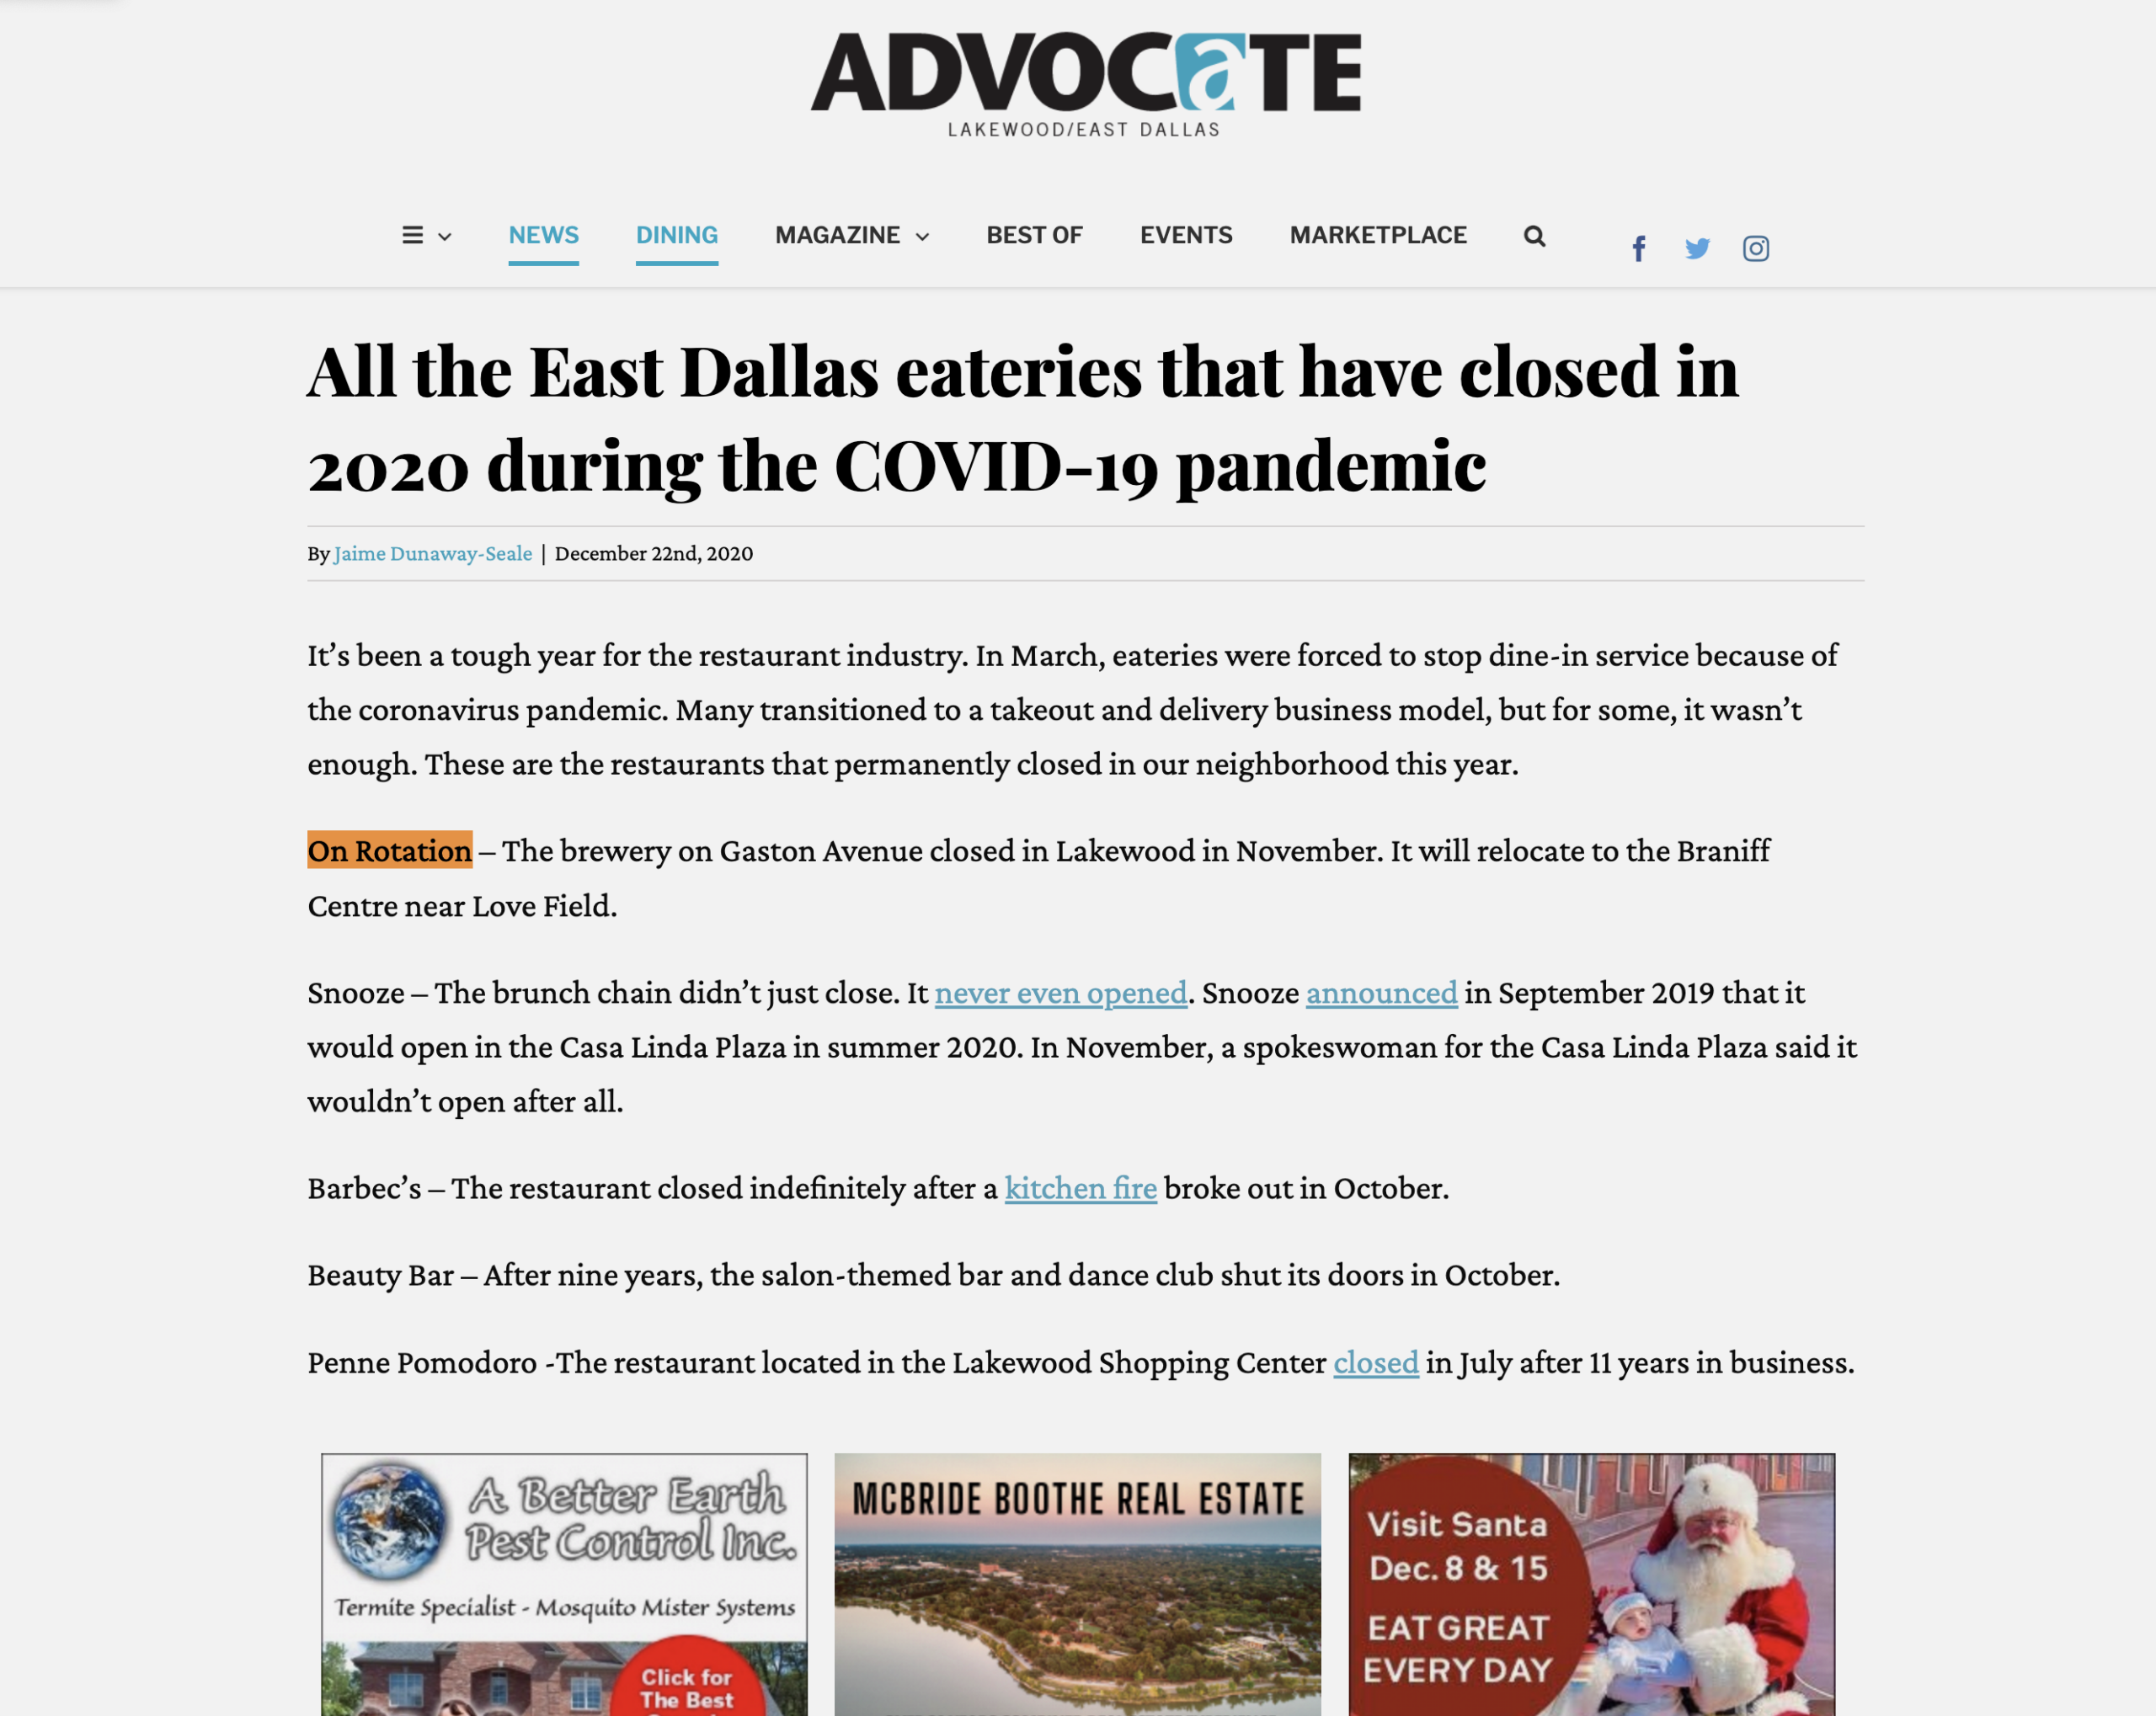 All the East Dallas eateries that closed in 2020